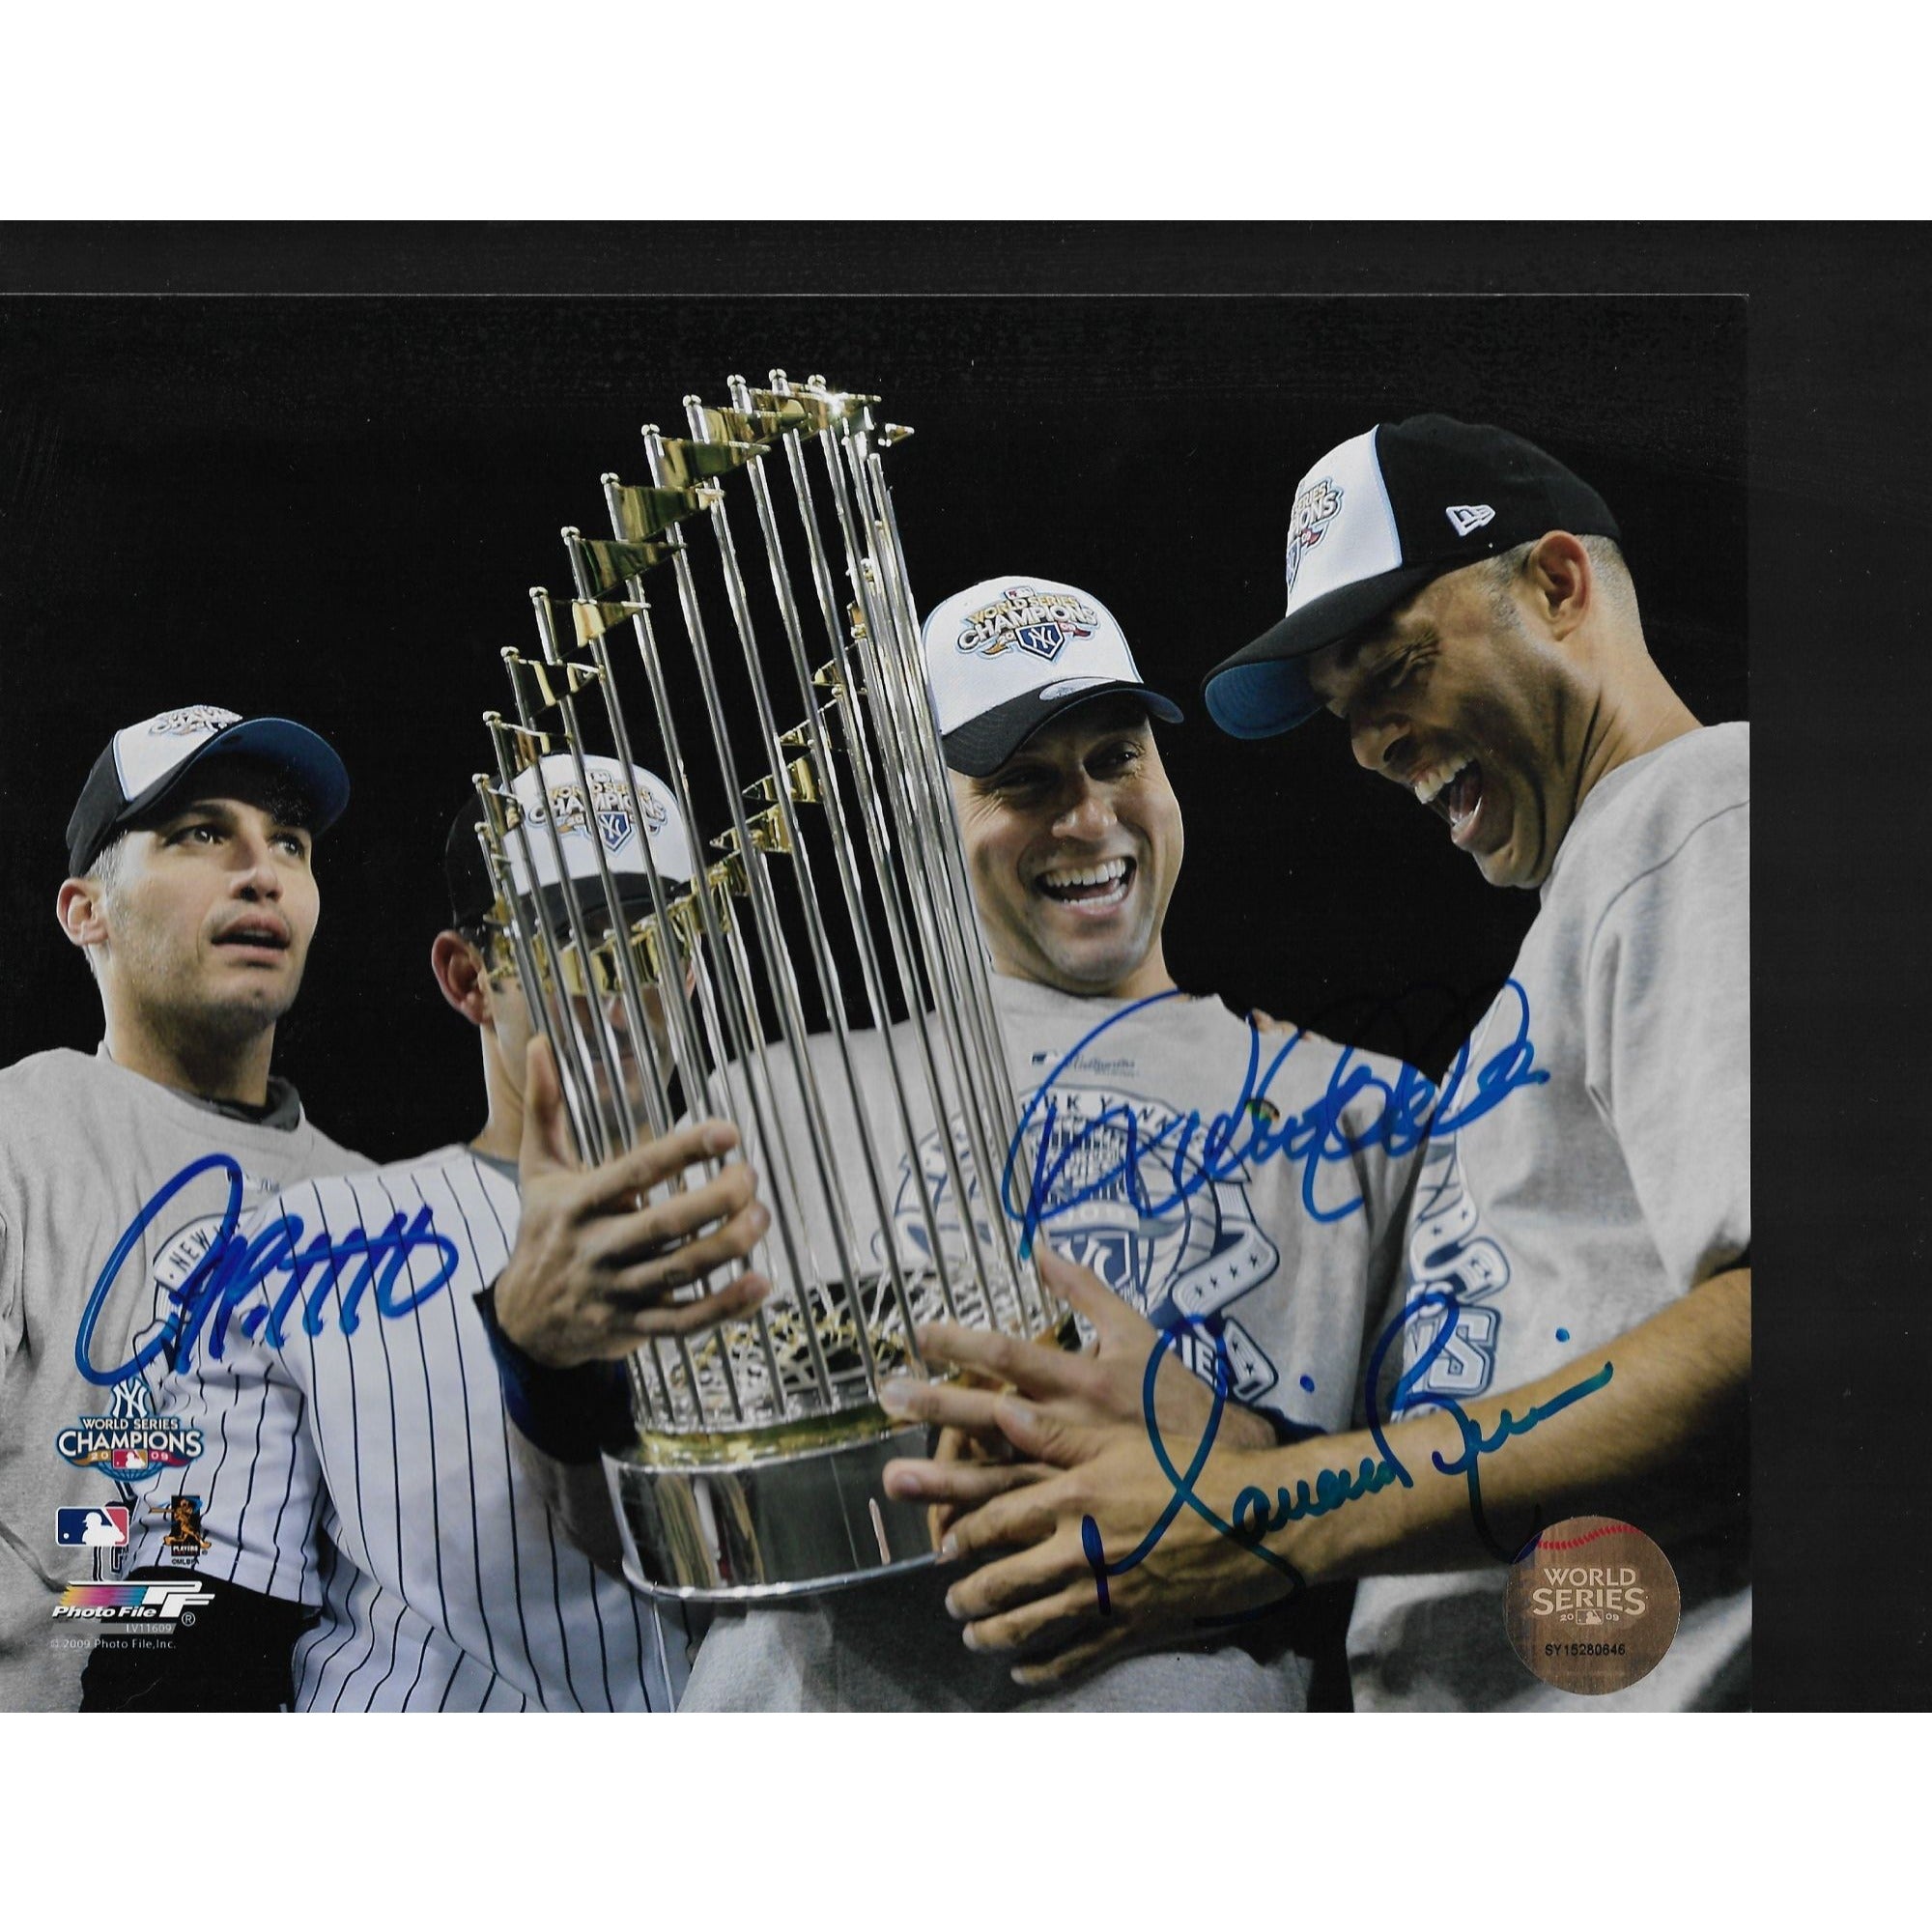 Derek Jeter Mariano Rivera and Andy pettitte. 8 by 10 signed photo